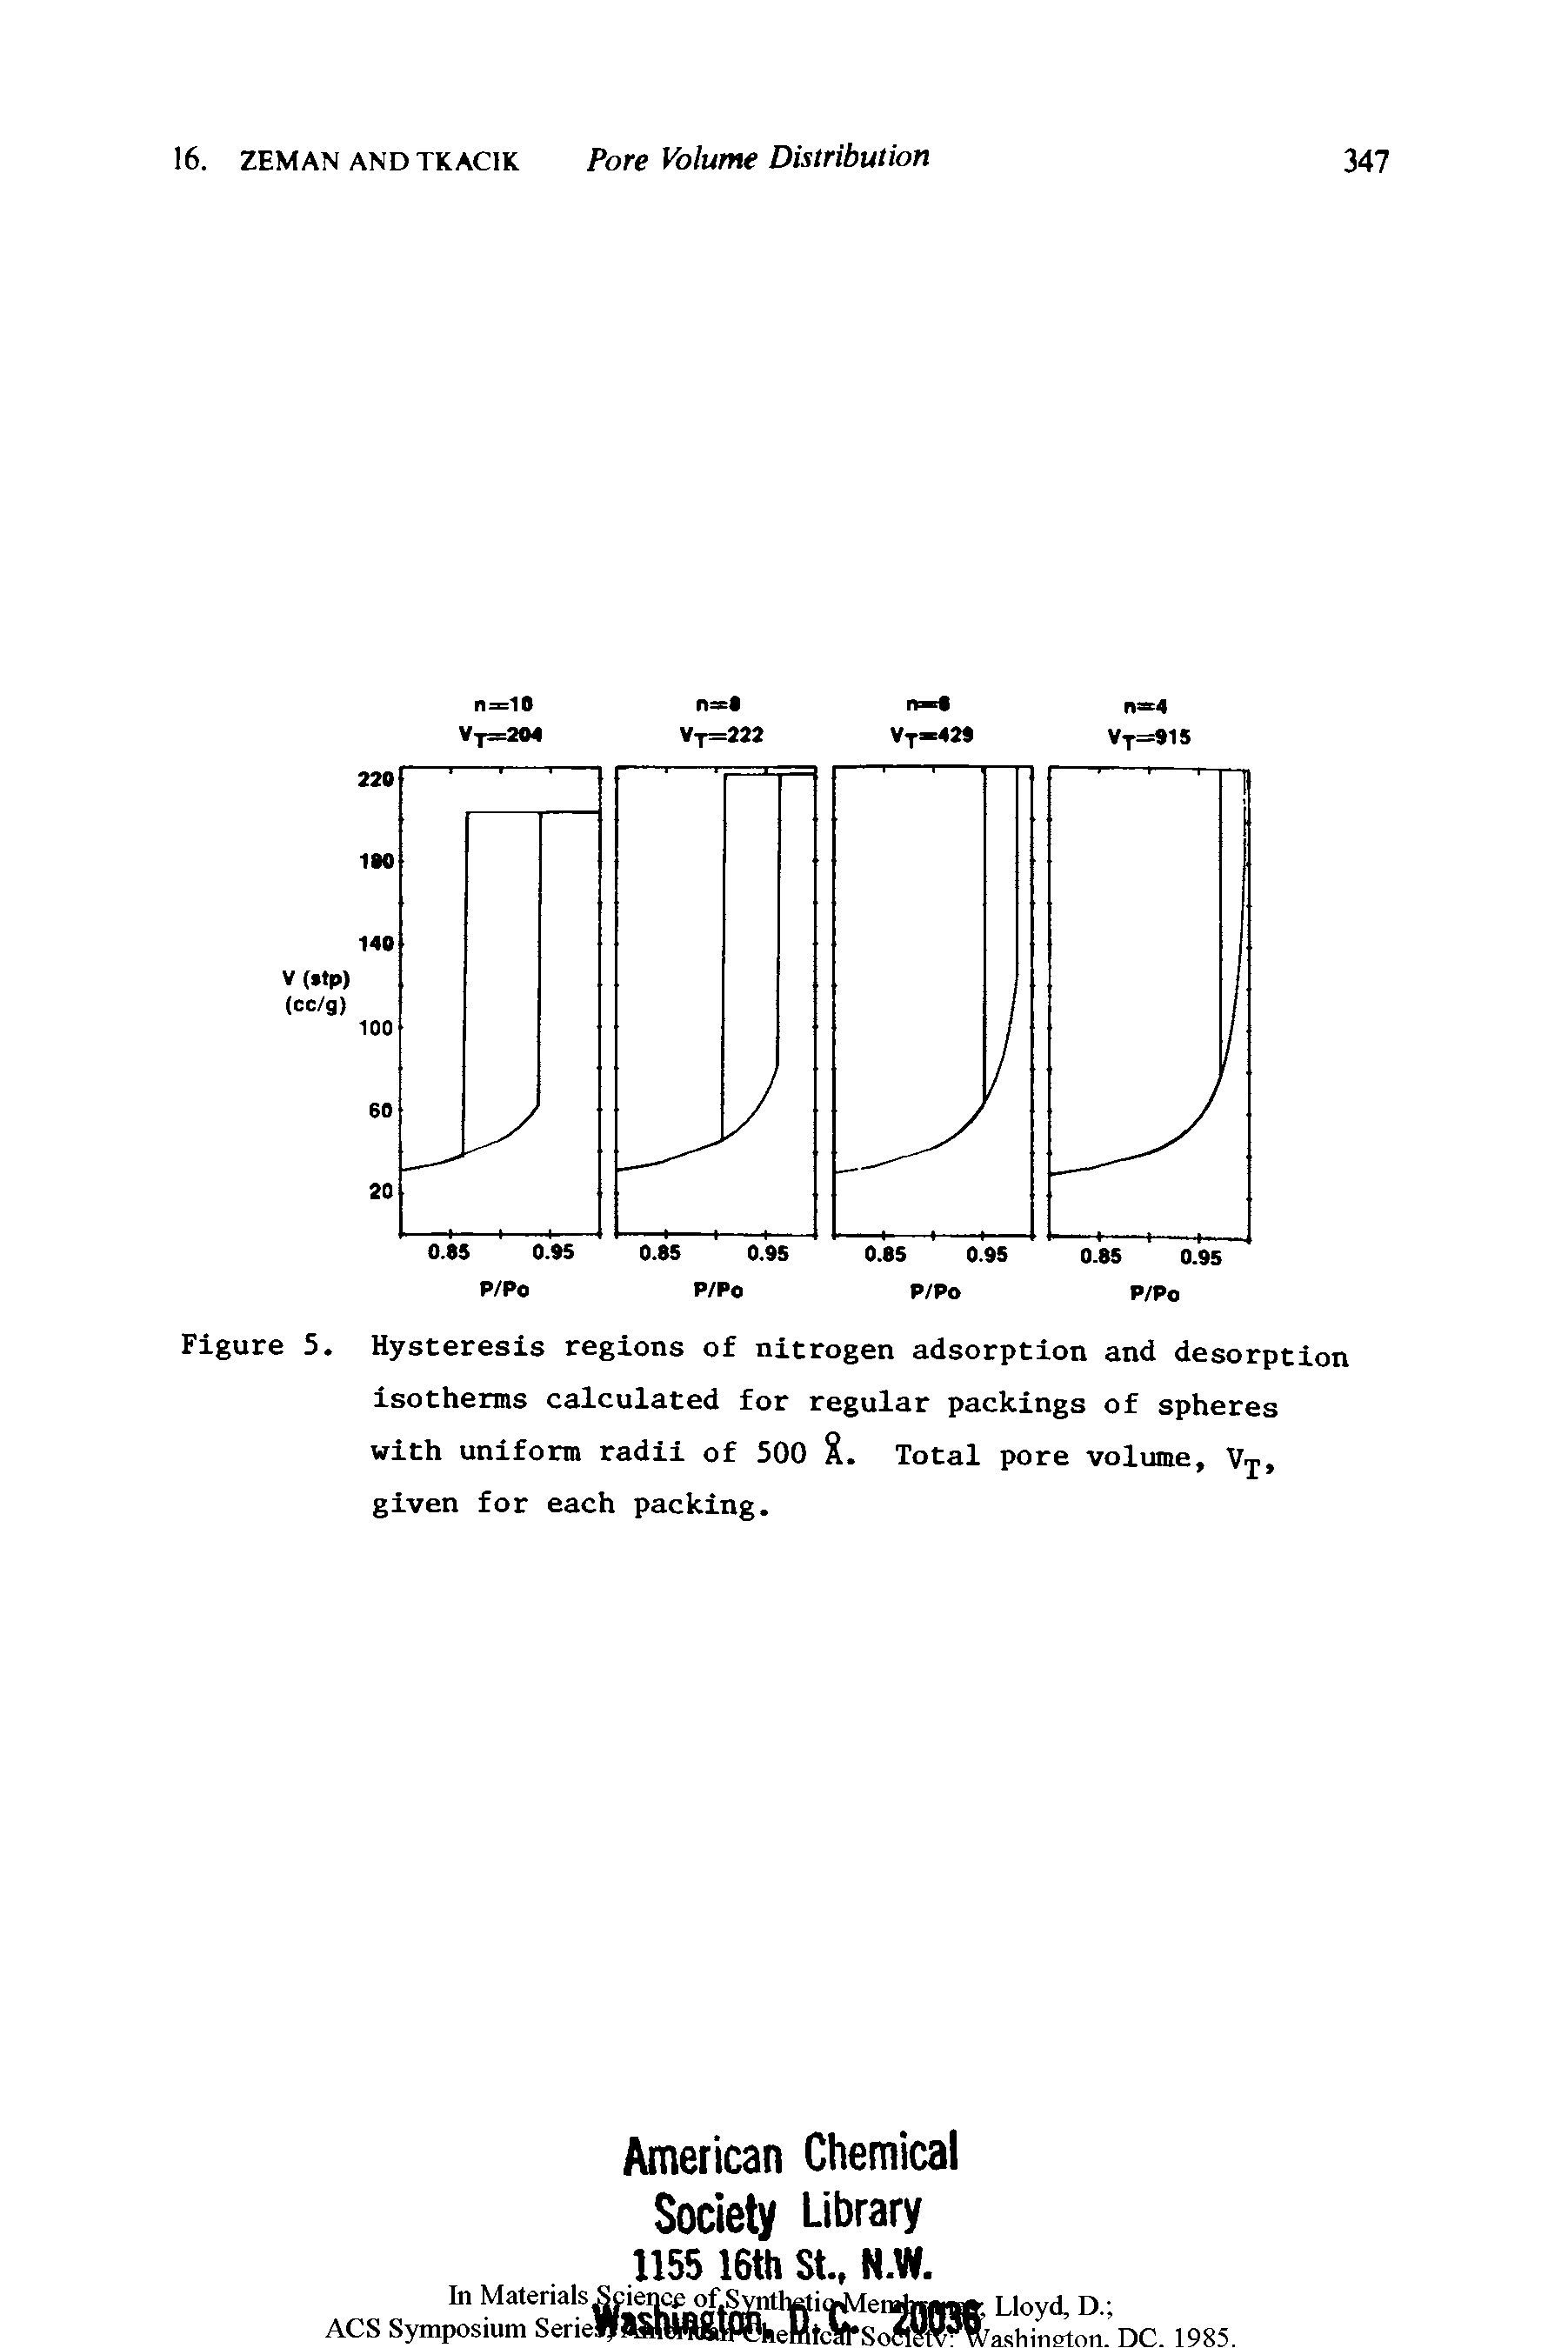 Figure 5. Hysteresis regions of nitrogen adsorption and desorption isotherms calculated for regular packings of spheres with uniform radii of 500 X. Total pore volume, Vj, given for each packing.